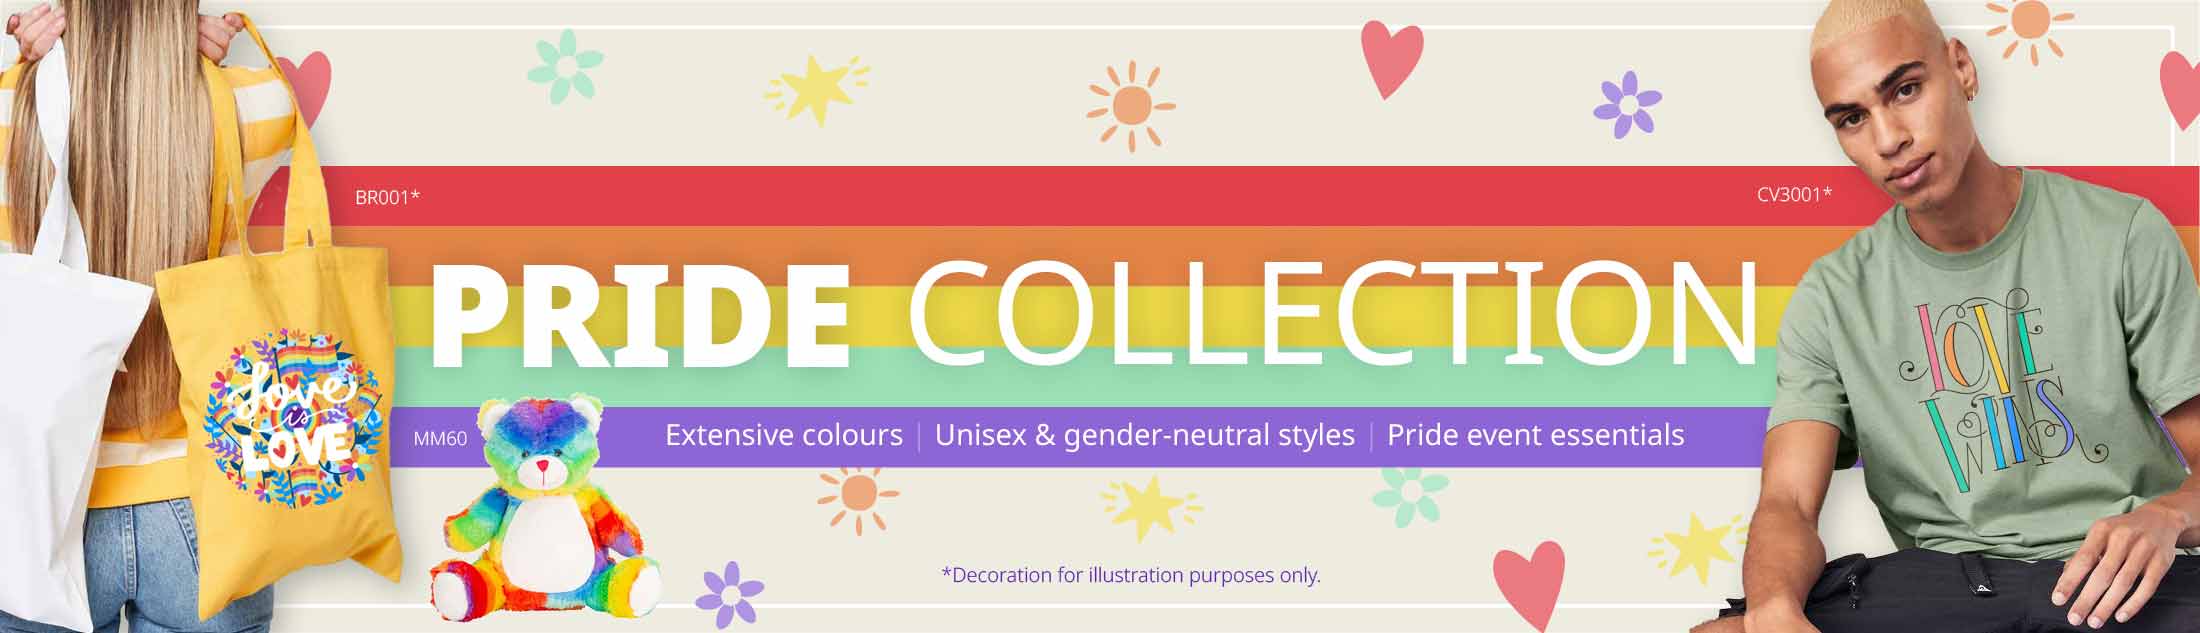 NEW Pride collection!